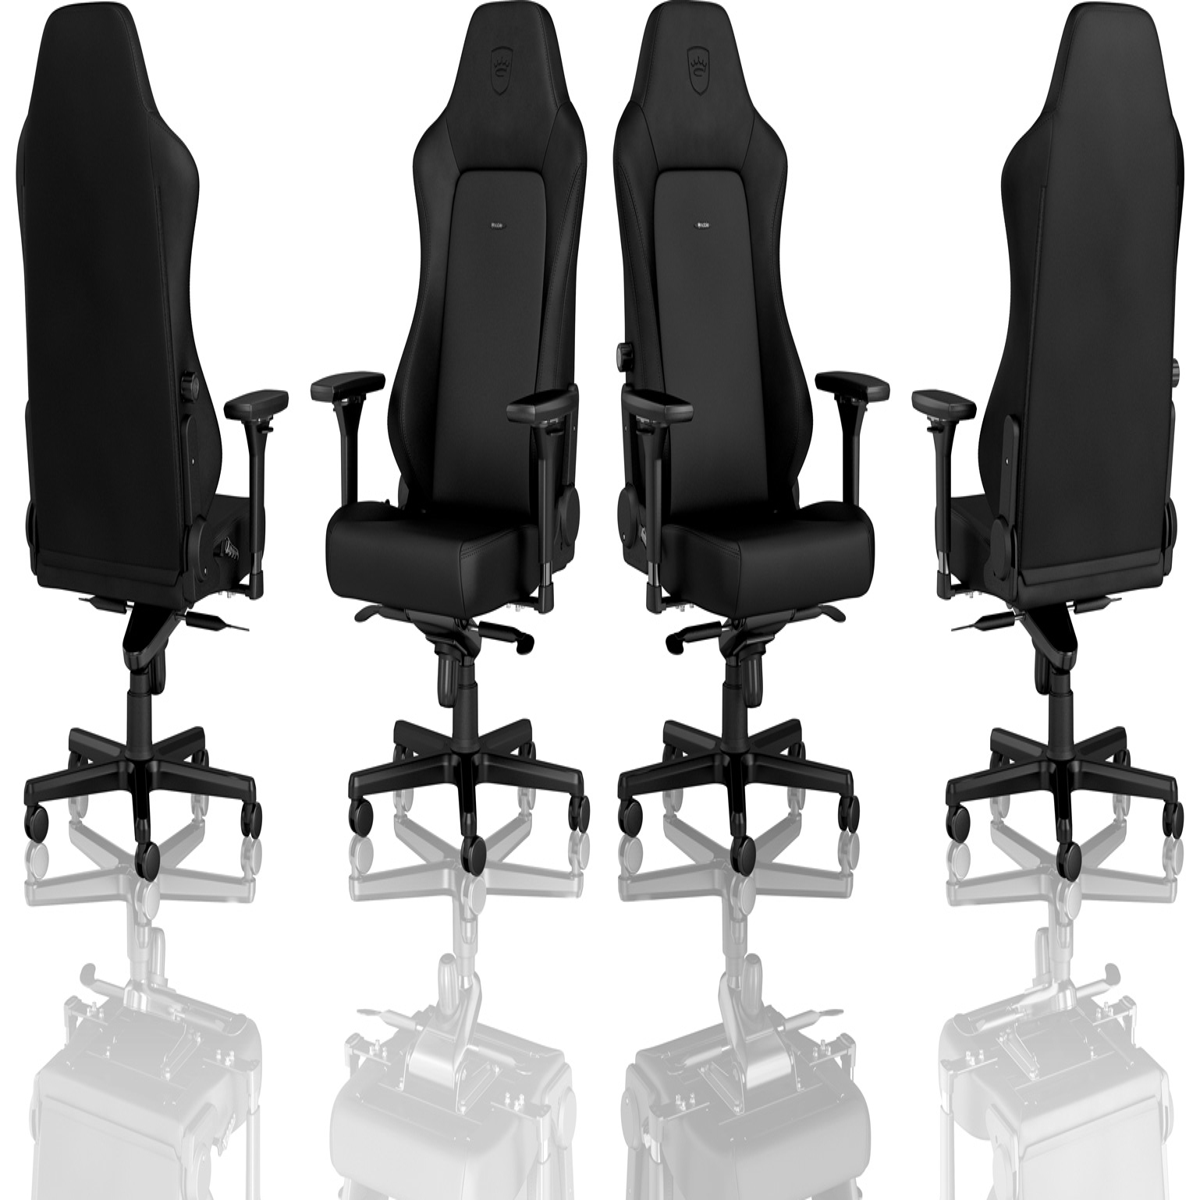 Noblechairs Hero Review: The Endgame Gaming Chair - KeenGamer